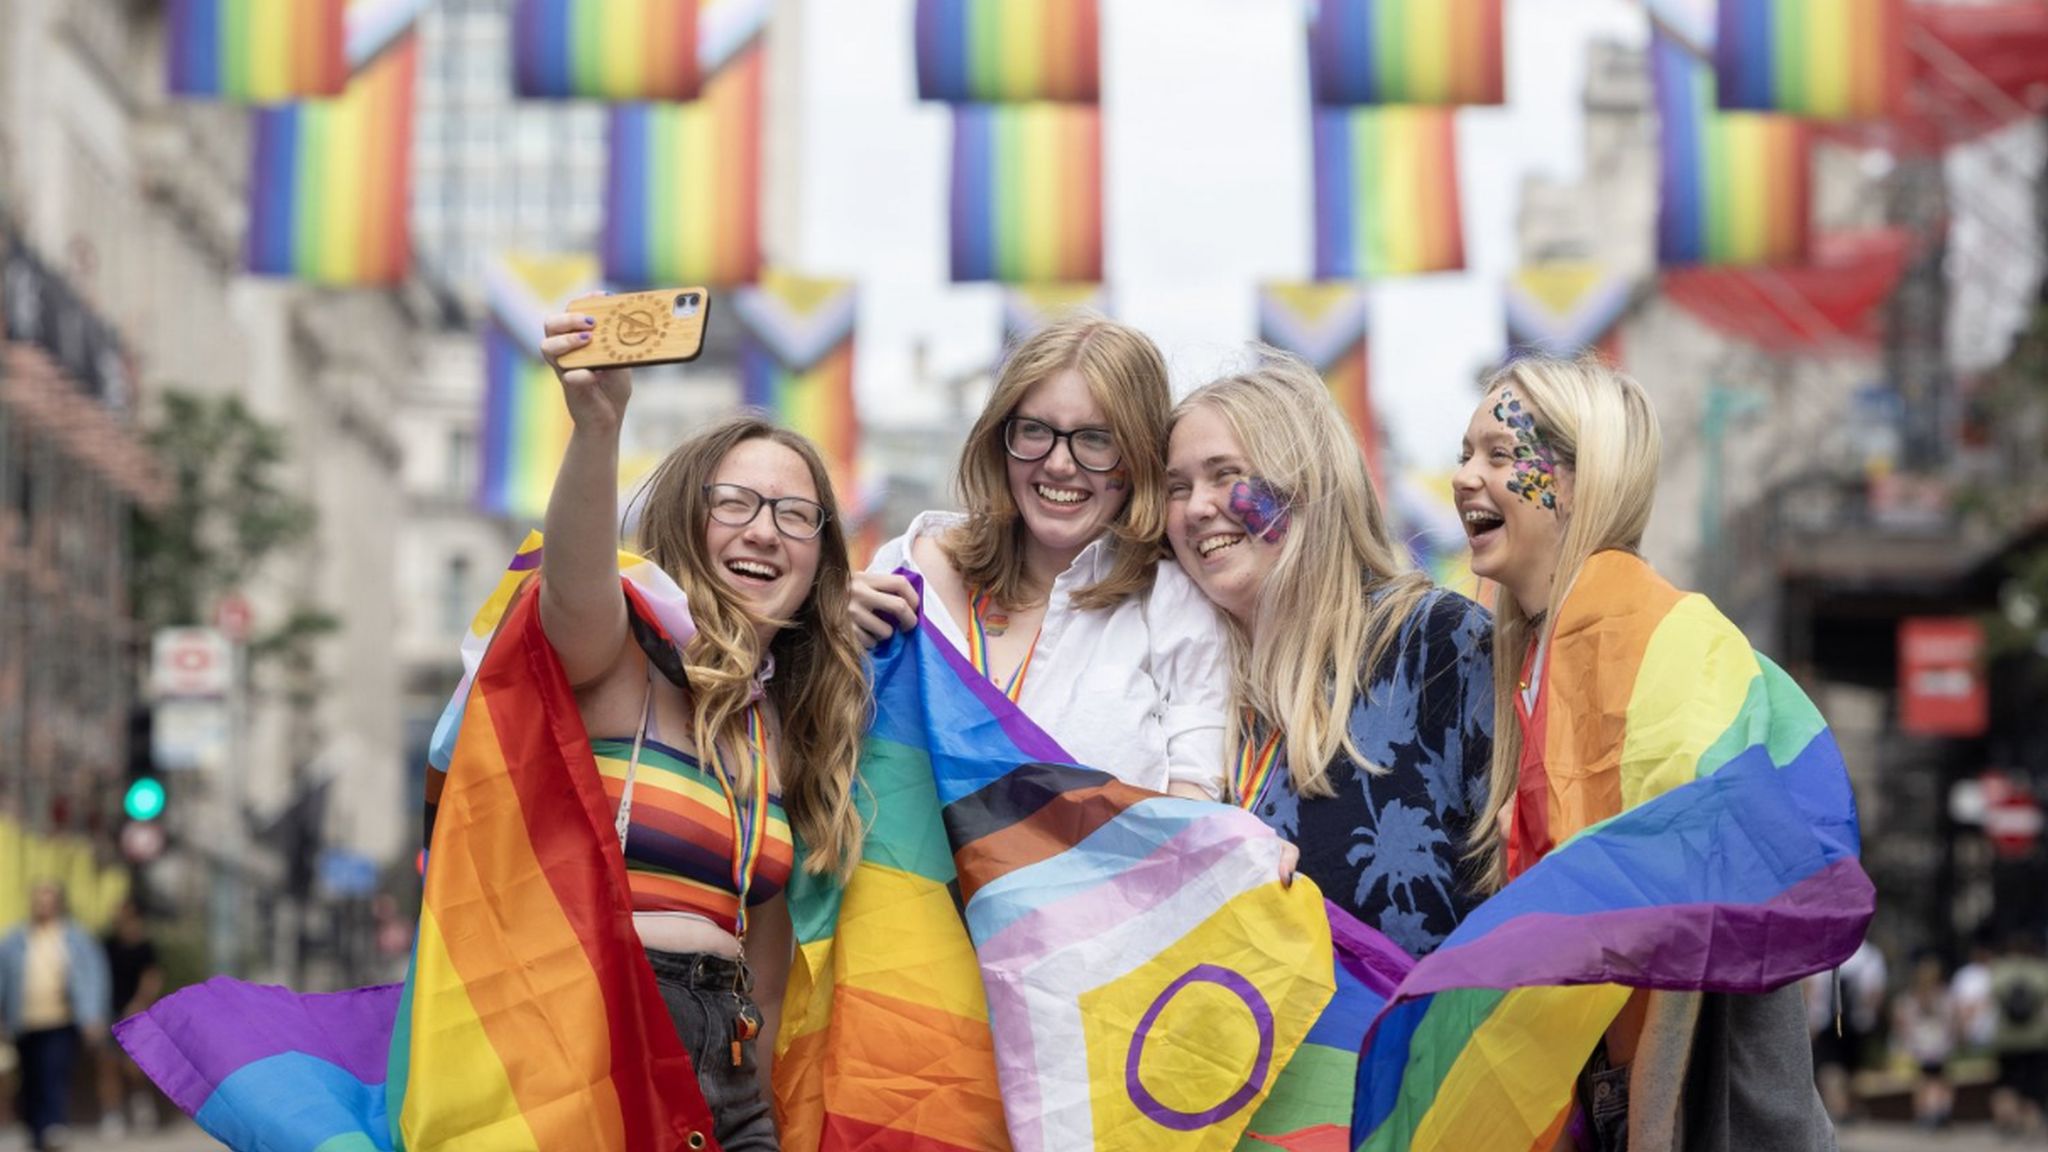 Isabel Cato, Ashleigh Tory, Charley Cook and Matilda Beavers take a selfie on Regent Street in front of Intersex-Inclusive Pride flags which were designed by Valentino Vecchietti